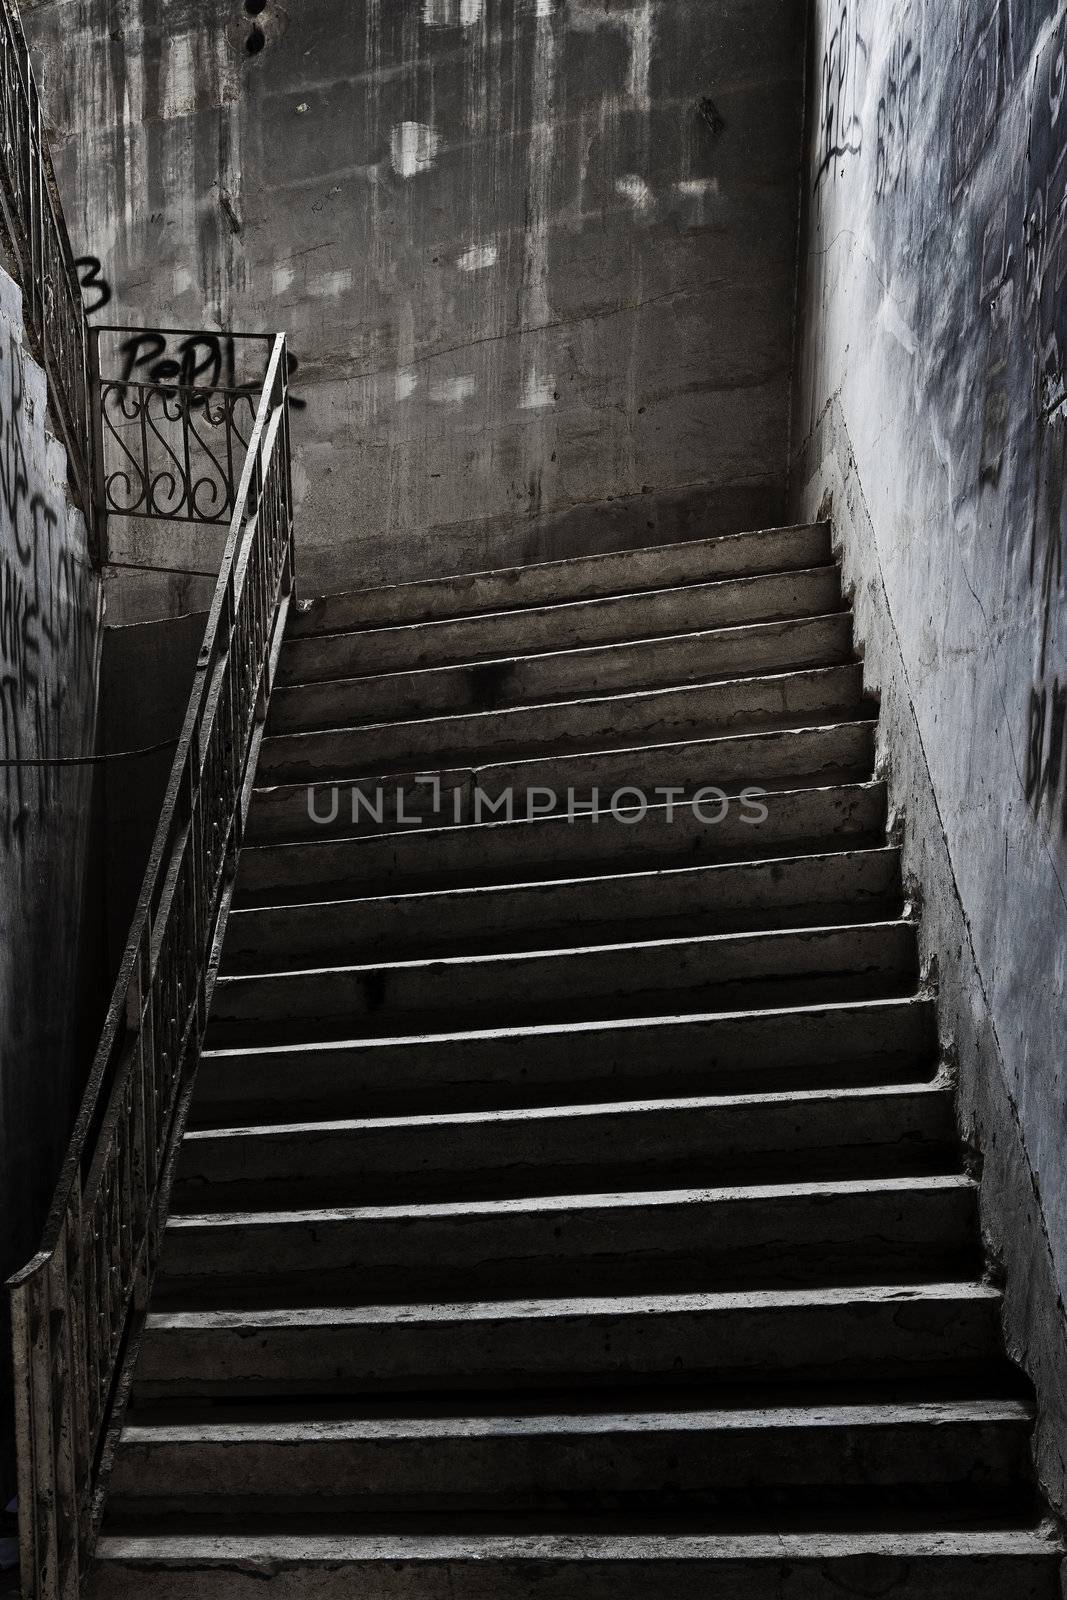 Bathmophobia or Climacophobia is the fear of stairs or climbing stairs